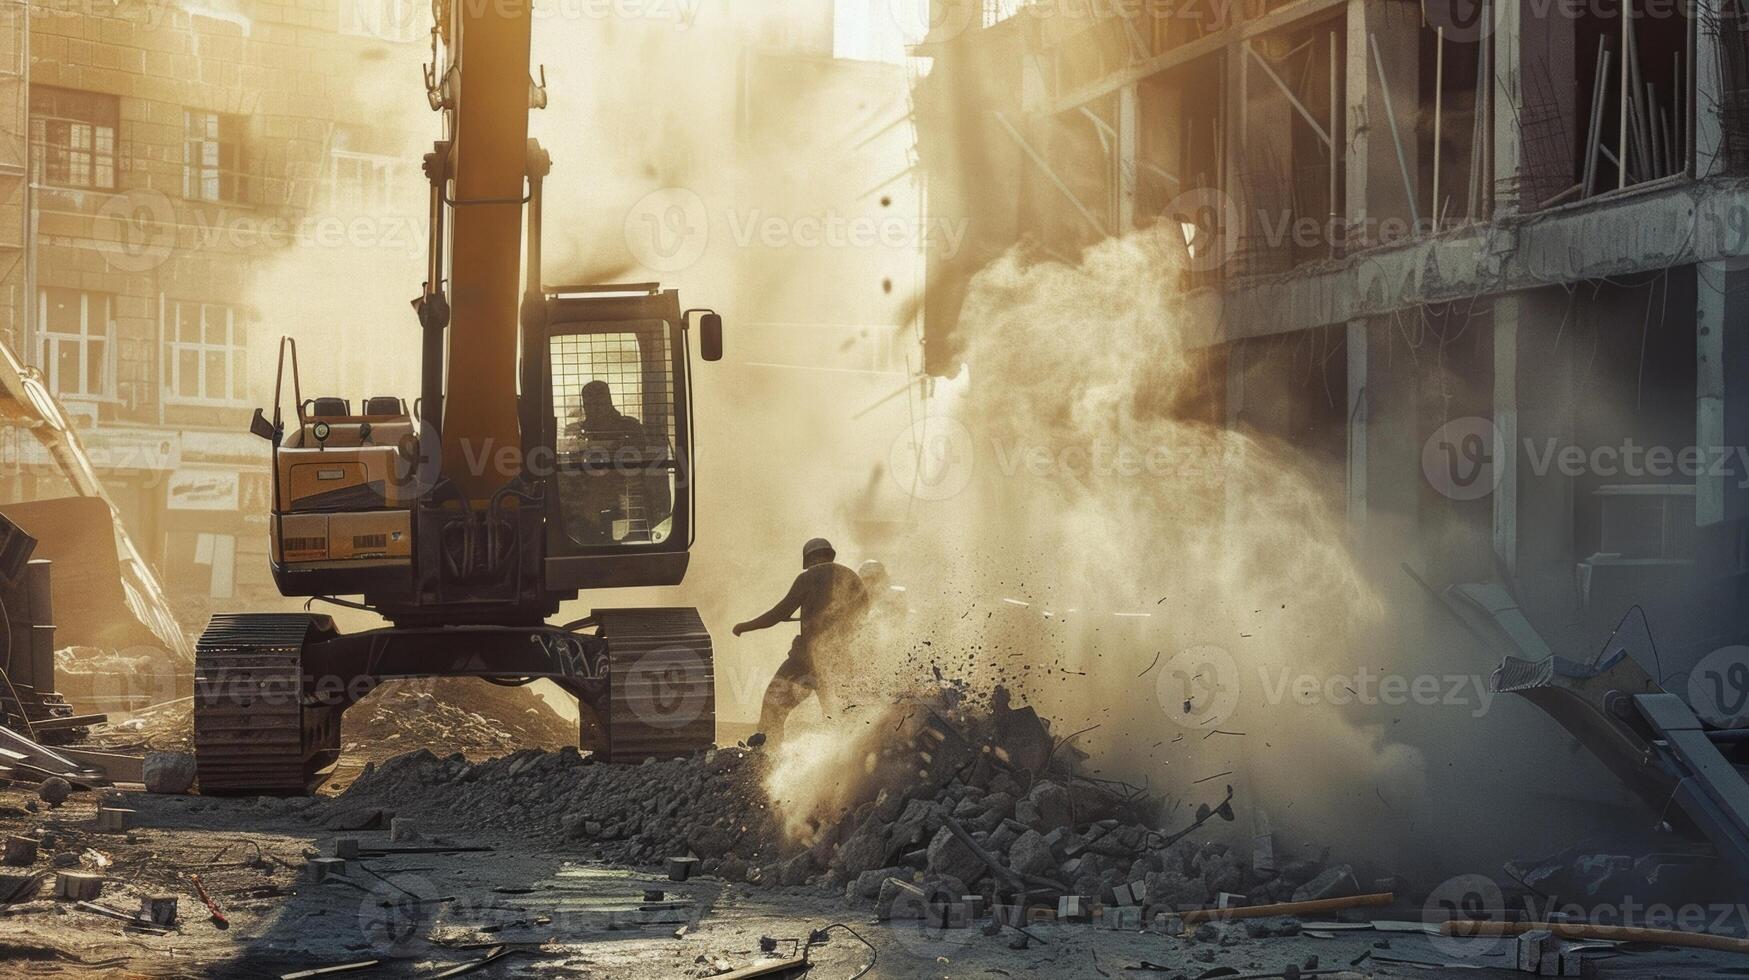 Dust and debris fly as workers use heavy machinery to hoist steel beams into place carefully avoiding collisions and mishaps photo